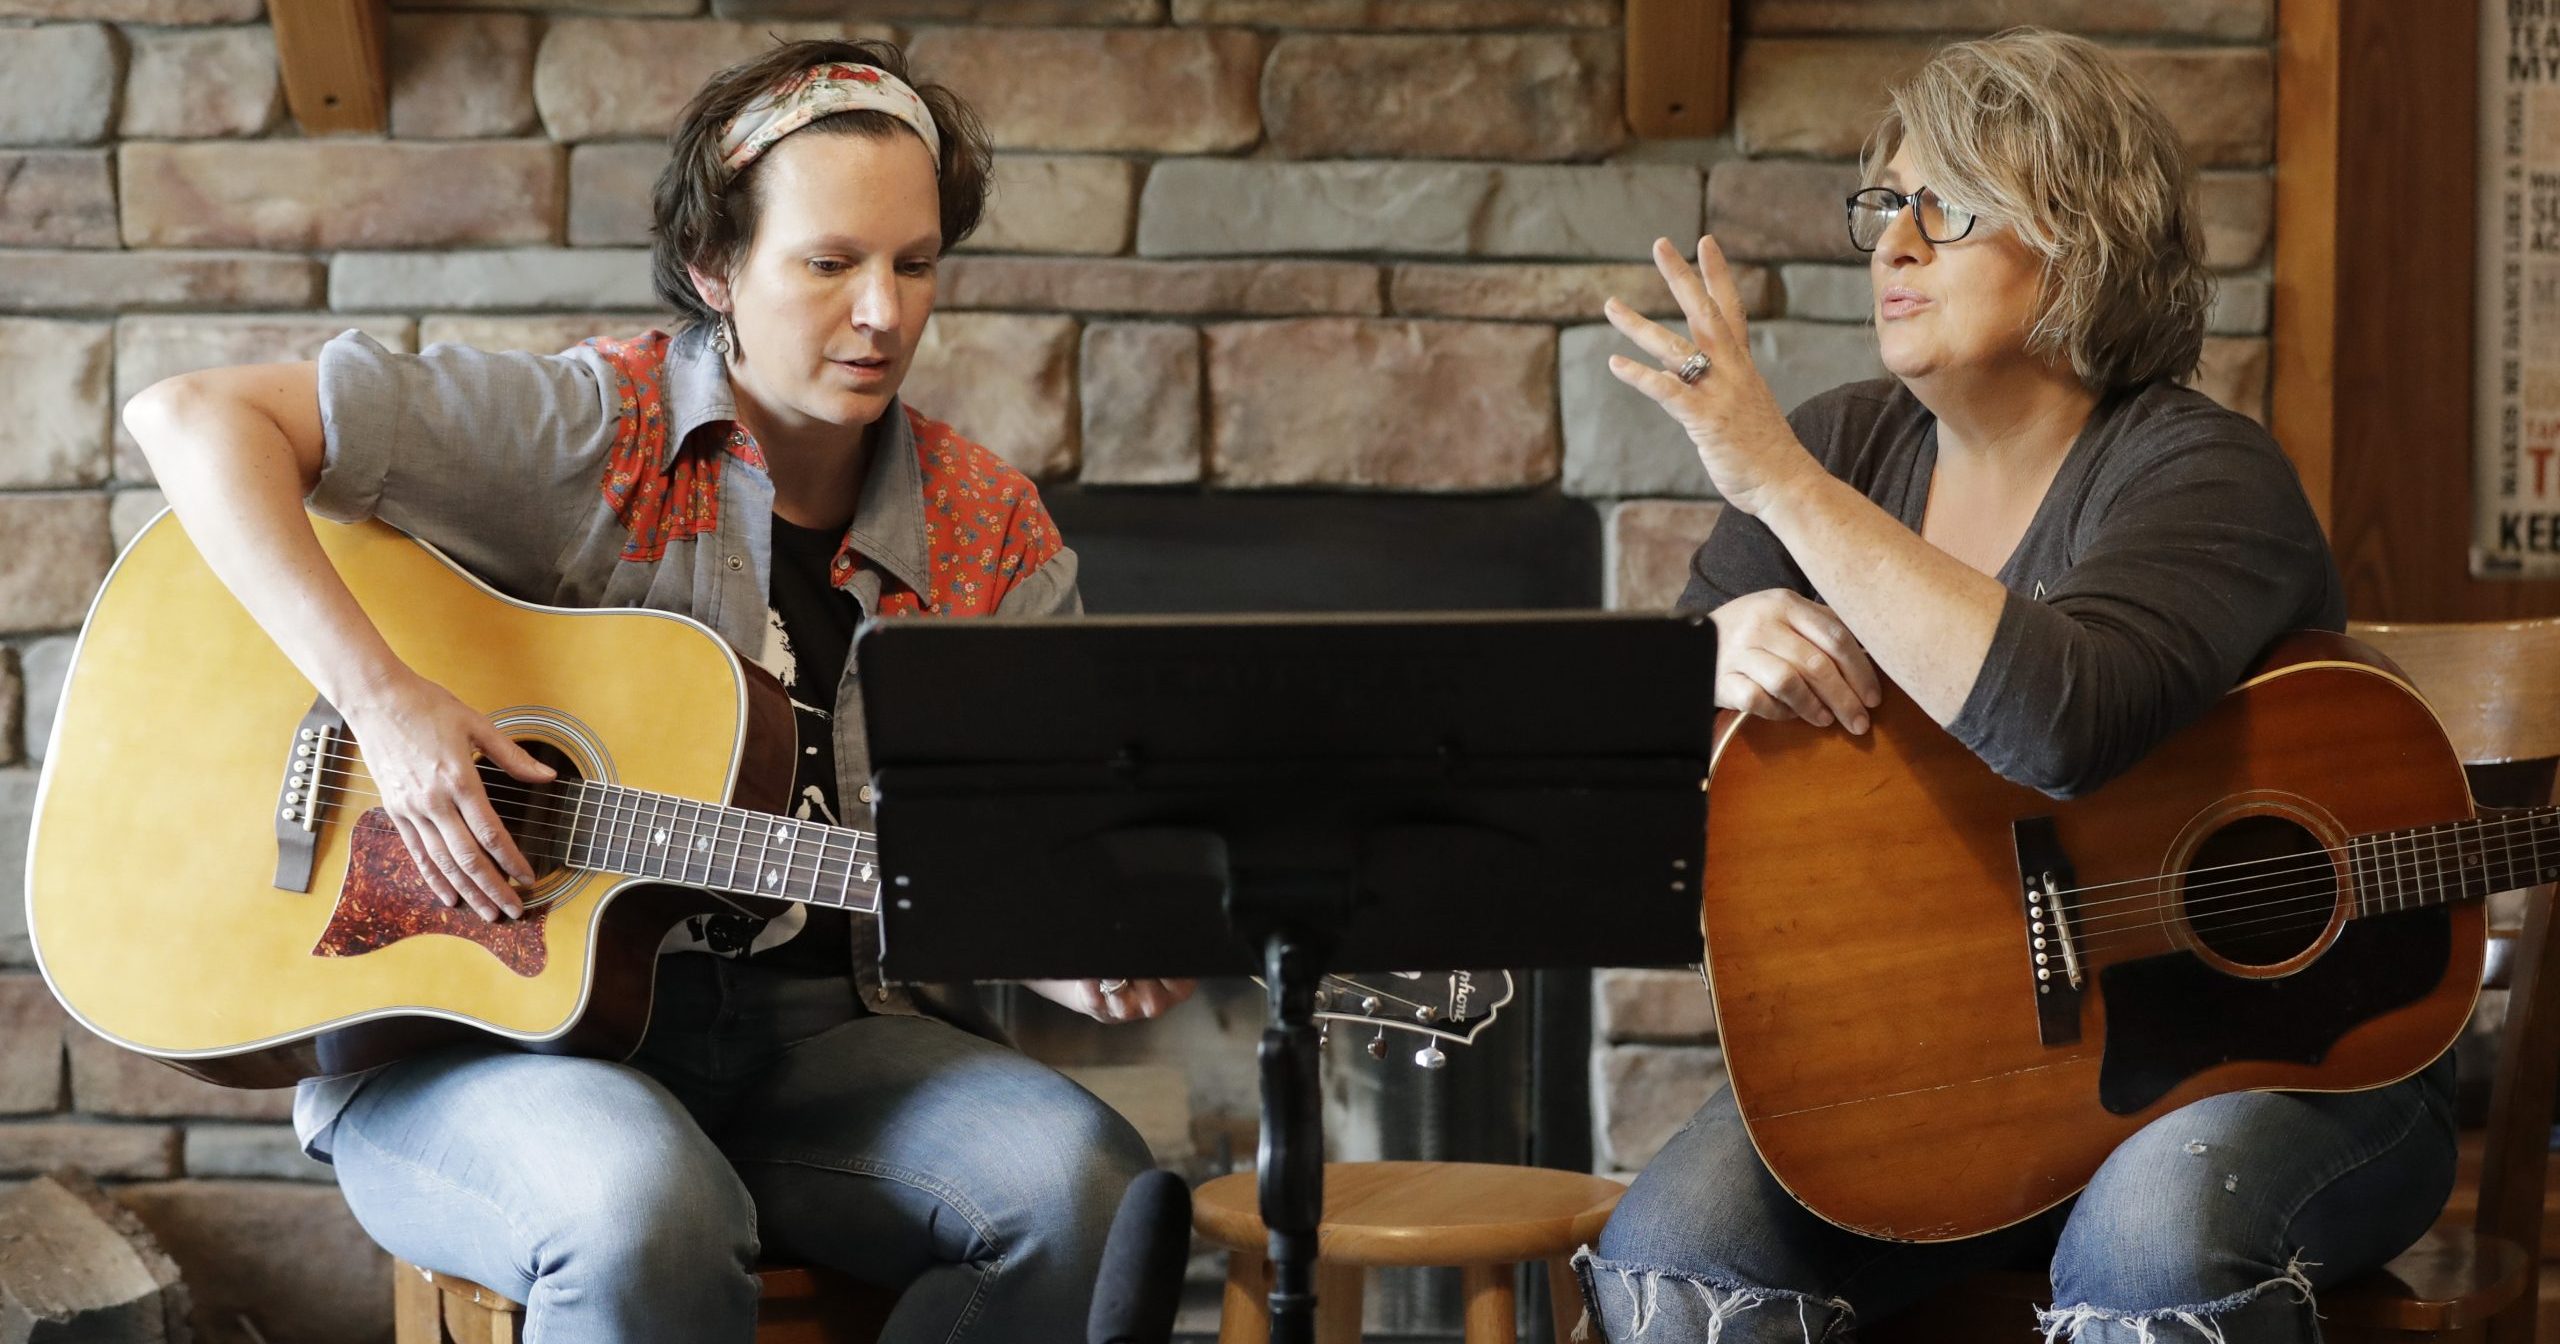 In this May 22, 2020, photo, nurse Megan Palmer, left, and care partner Anna Henderson, who both work at Vanderbilt University Medical Center, are seen during a songwriting session at Henderson's home in Ashland City, Tennessee. During the coronavirus pandemic, their role as caregivers has become even more important as hospital visits from family and friends are limited or prohibited.